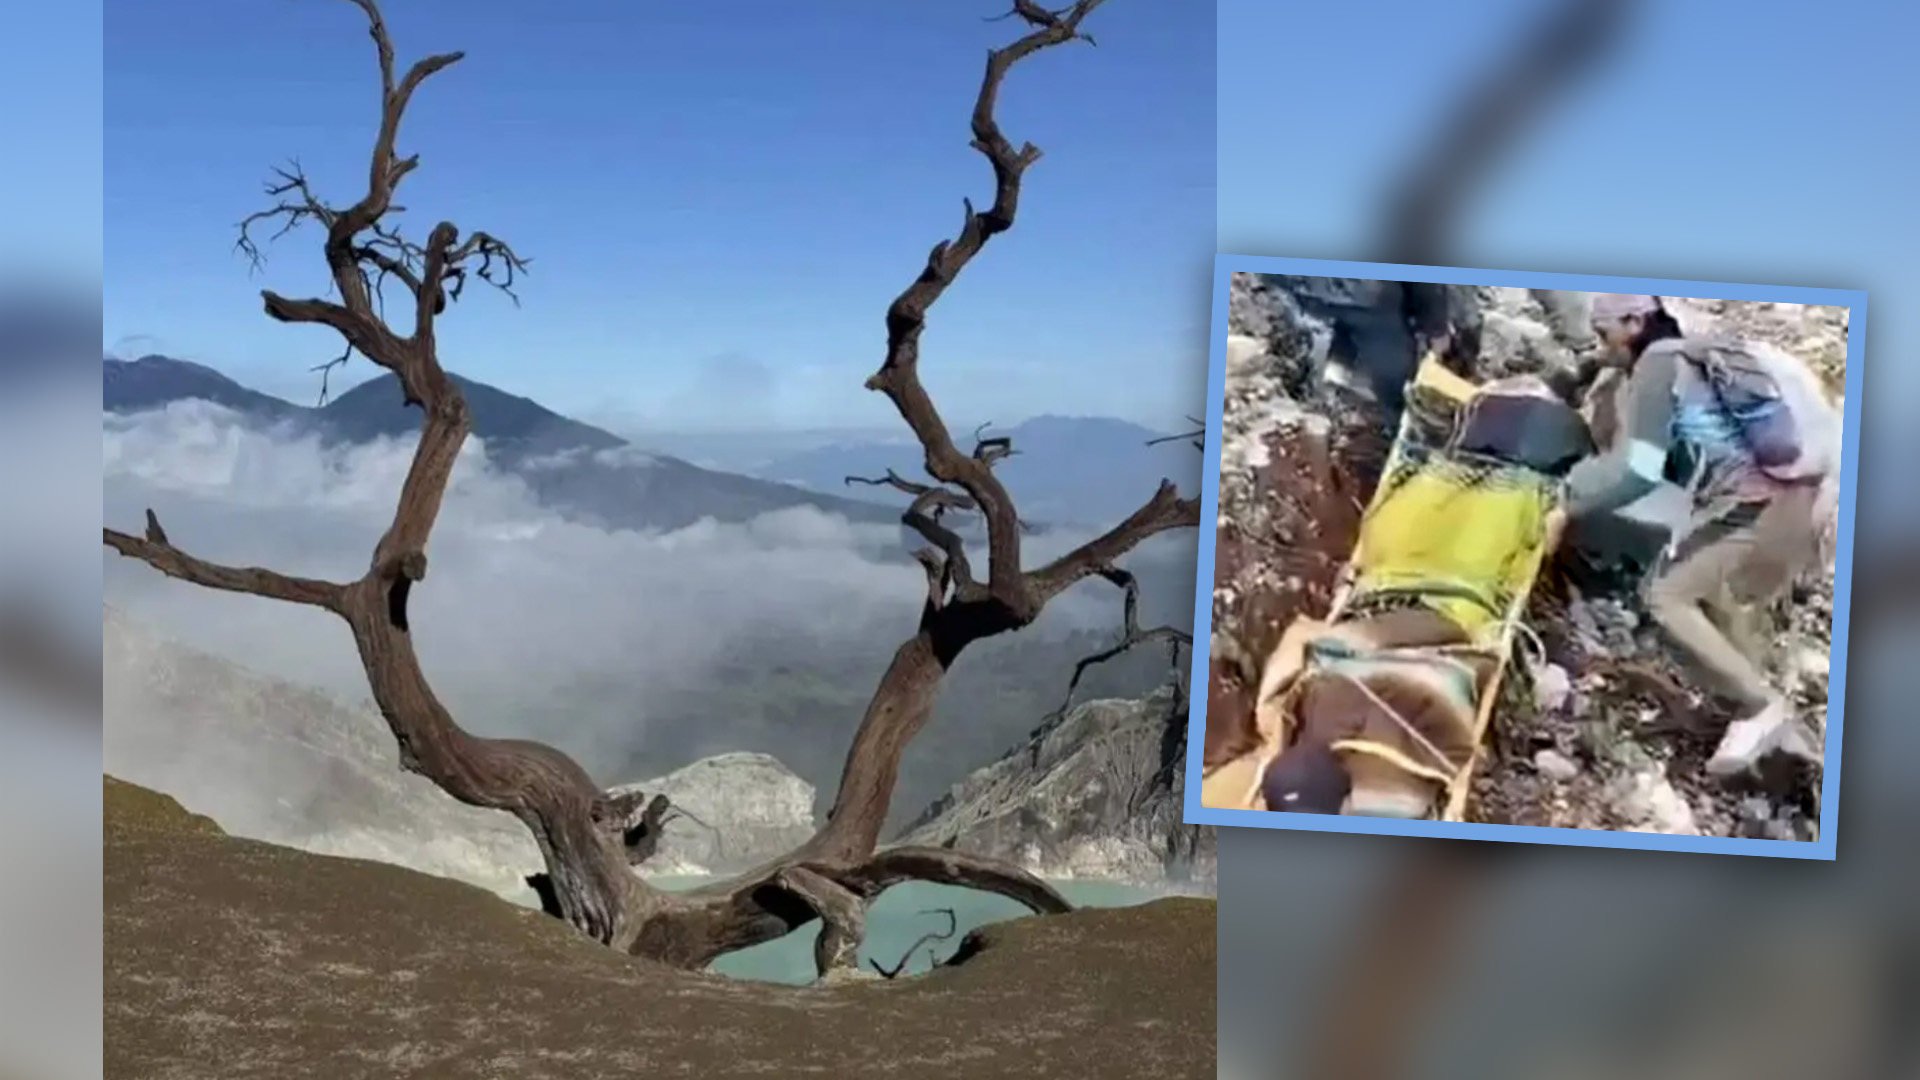 A woman tourist from China has died after she plunged off a cliff at a famous volcano site in Indonesia as her husband took her photo. Photo: SCMP composite/Baidu/Sohu